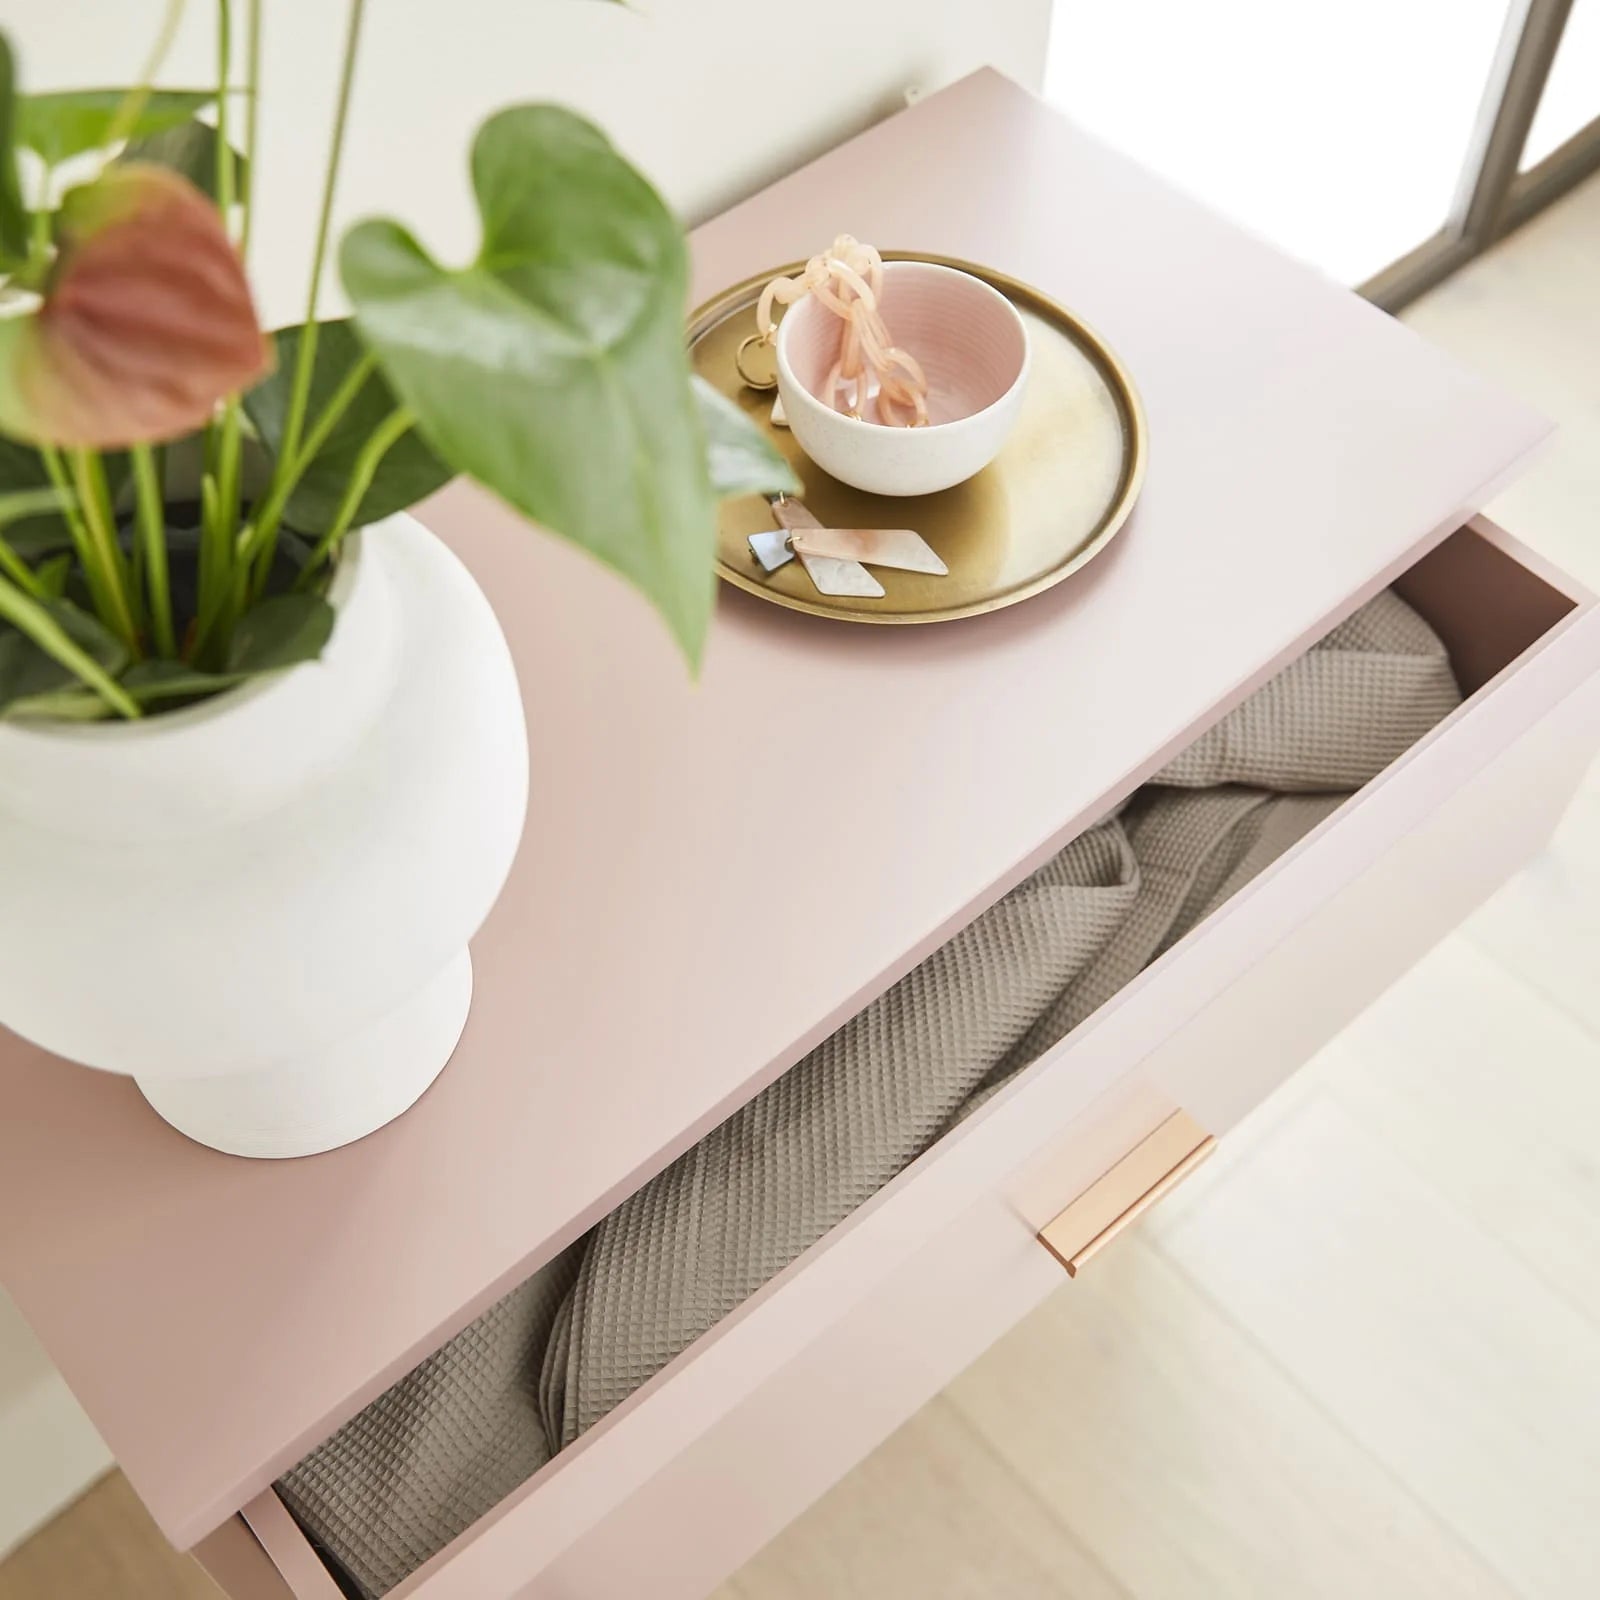 Monroe pink painted solid wood chest of drawers with metal hardware | malletandplane.com